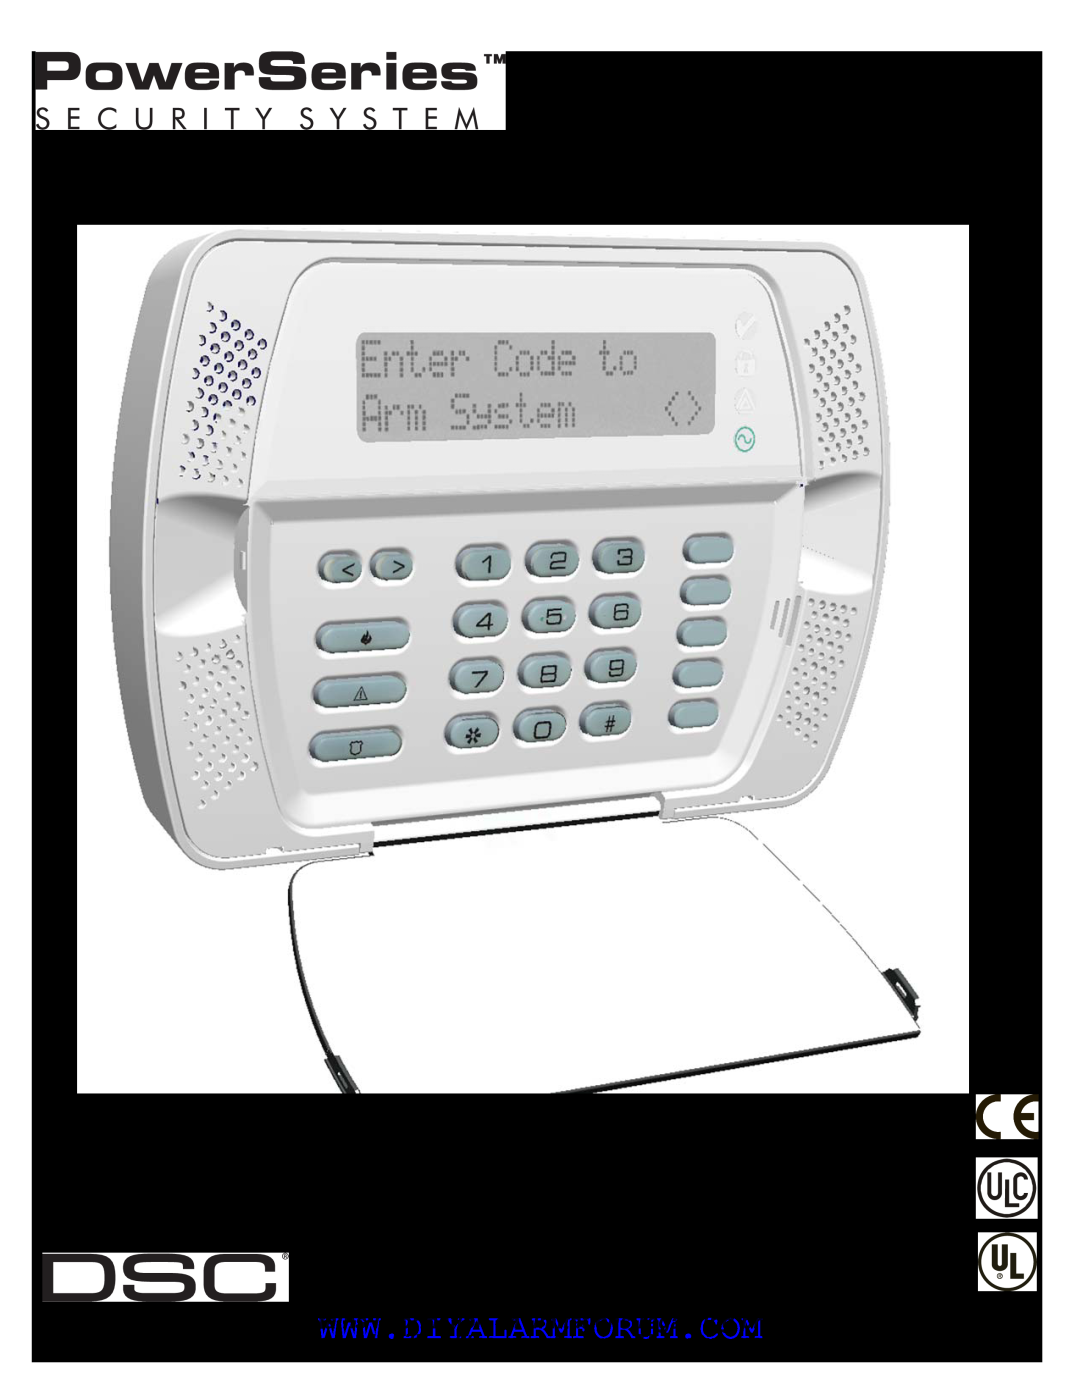 DSCover Satellite Products SCW904x manual Installation Guide, Self Contained Wireless Alarm System 